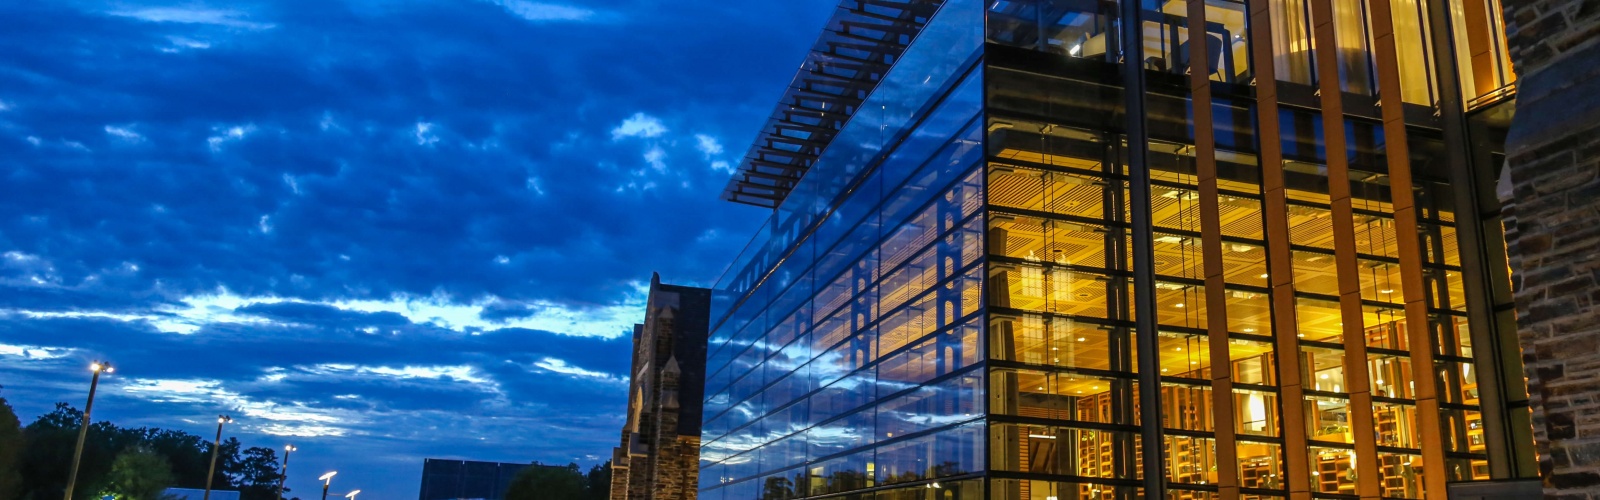 Outside view of the Brodhead Center from the Plaza at dusk